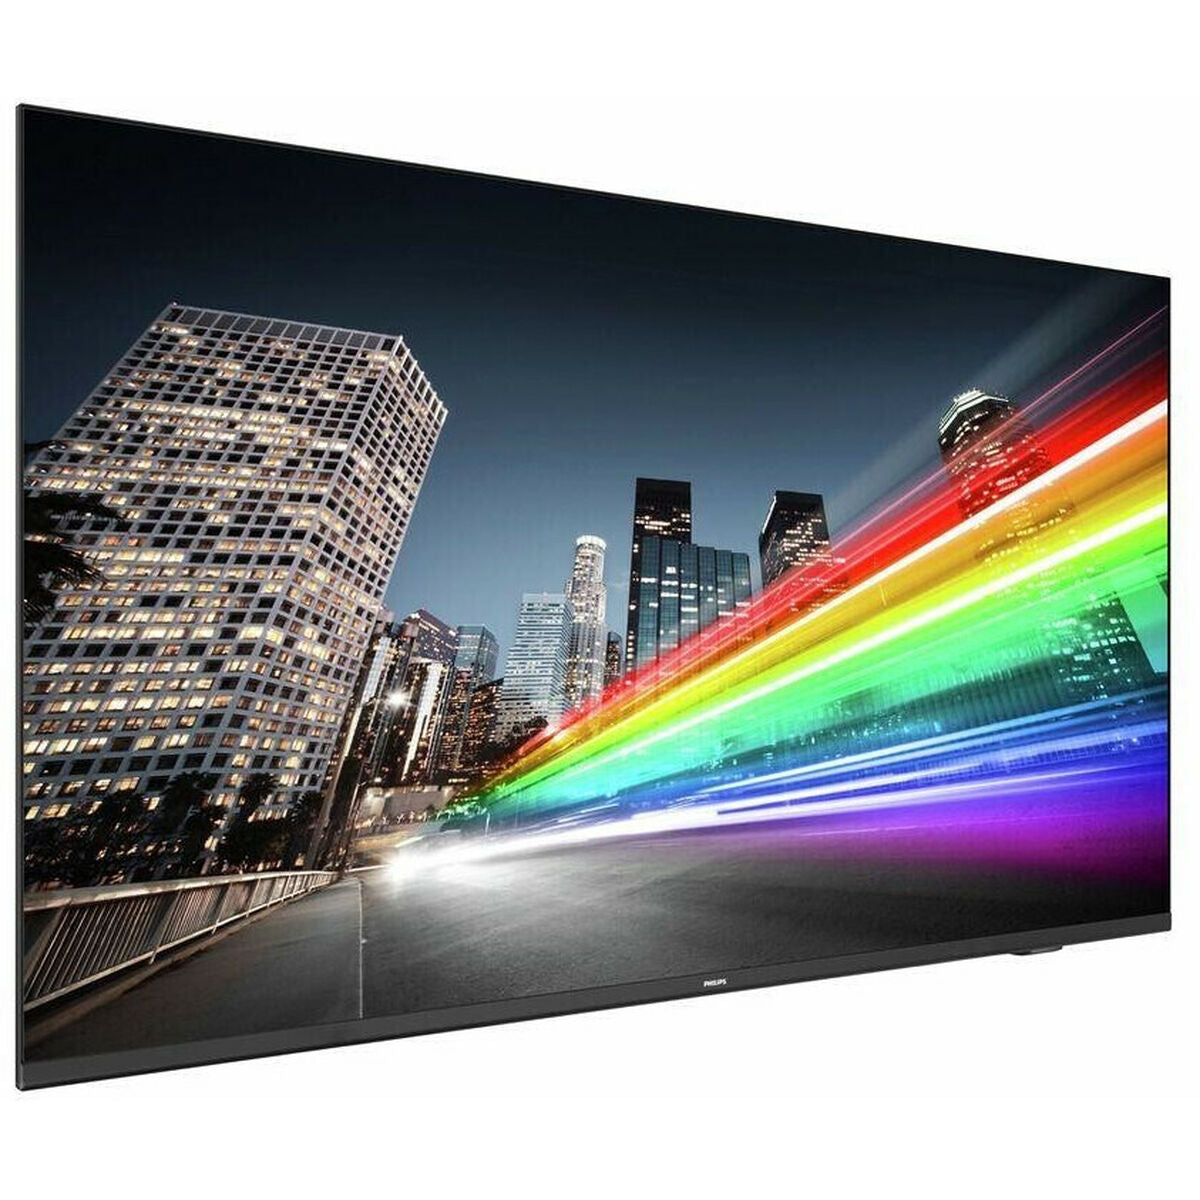 Monitor Videowall Philips 70BFL2214 70" 4K Ultra HD, Philips, Computing, monitor-videowall-philips-70bfl2214-70-4k-ultra-hd, Brand_Philips, category-reference-2609, category-reference-2642, category-reference-2644, category-reference-t-19685, category-reference-t-19902, computers / peripherals, Condition_NEW, office, Price_+ 1000, Teleworking, RiotNook